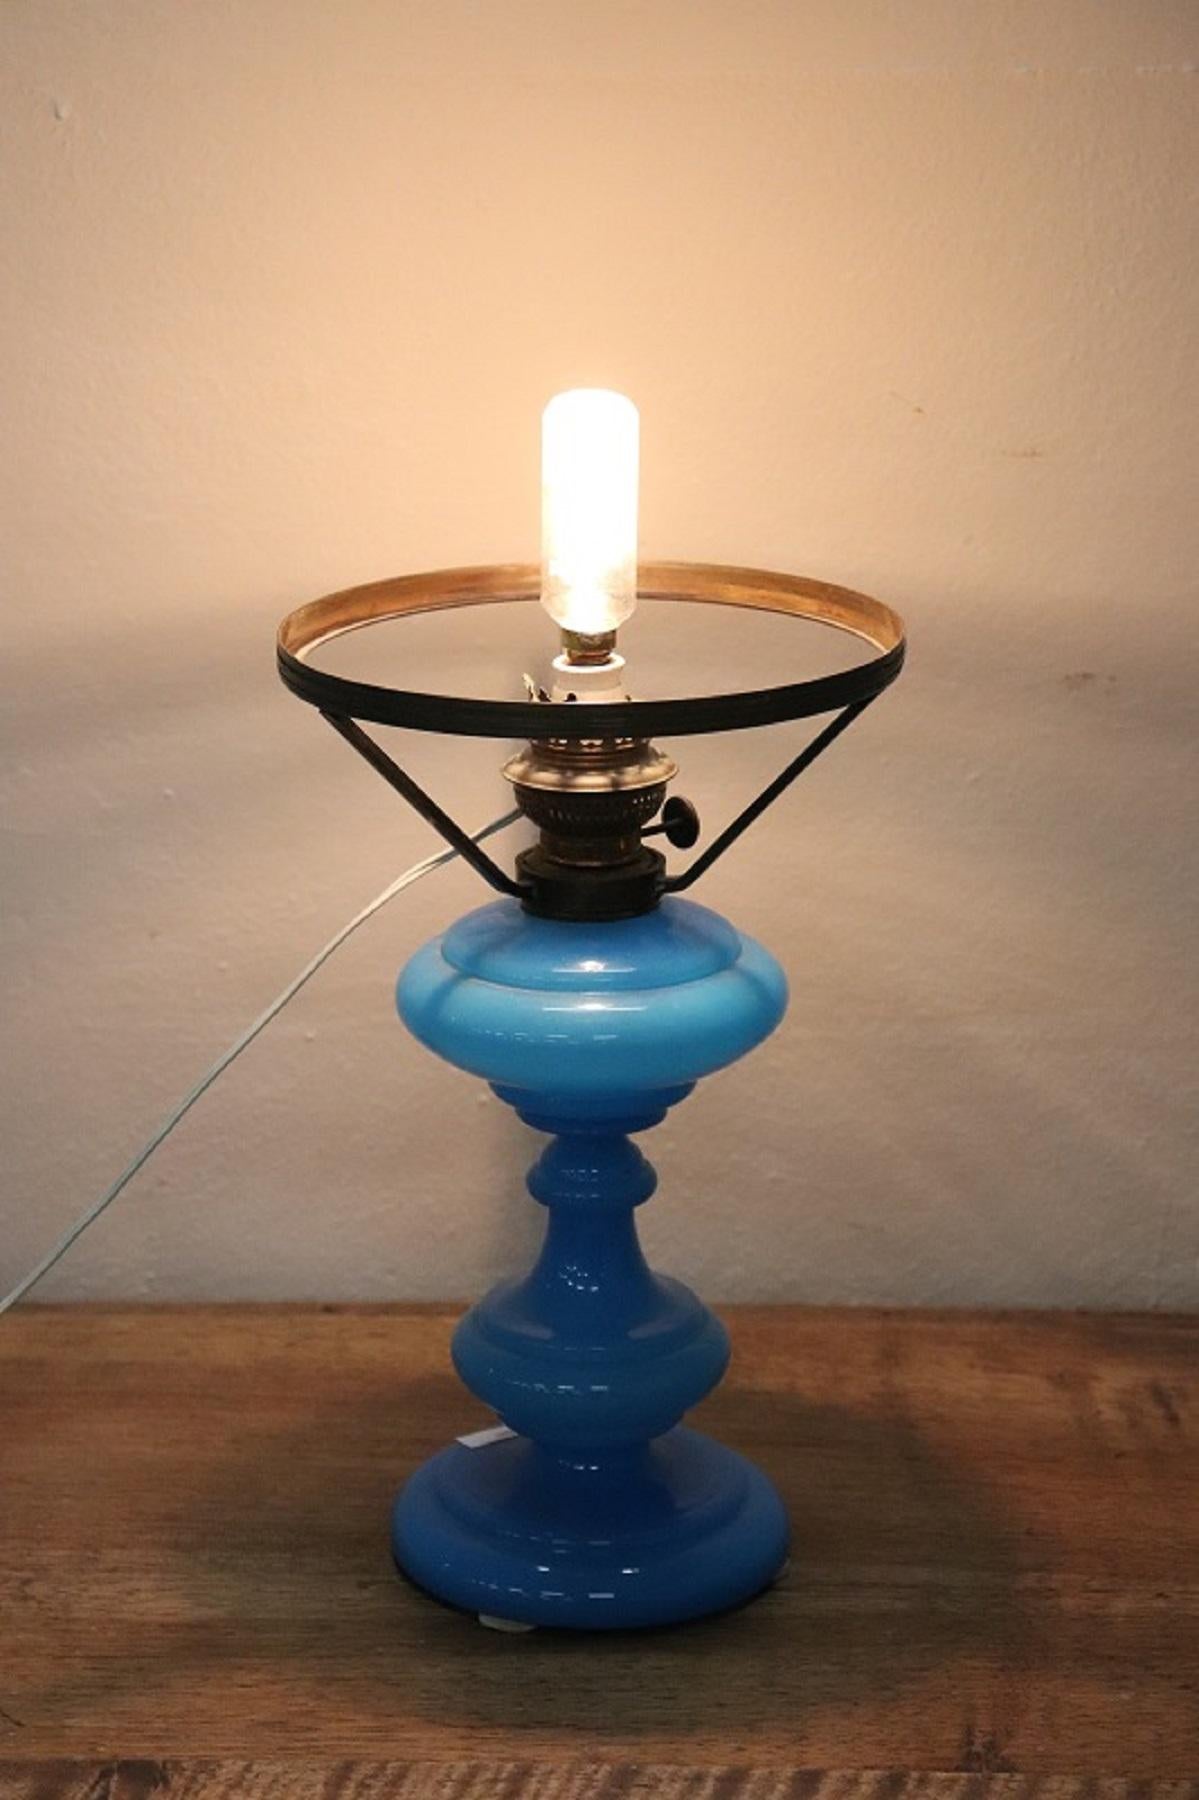 Refined artistic opal glass table lamp in blue color, Italy production, circa 1980s.